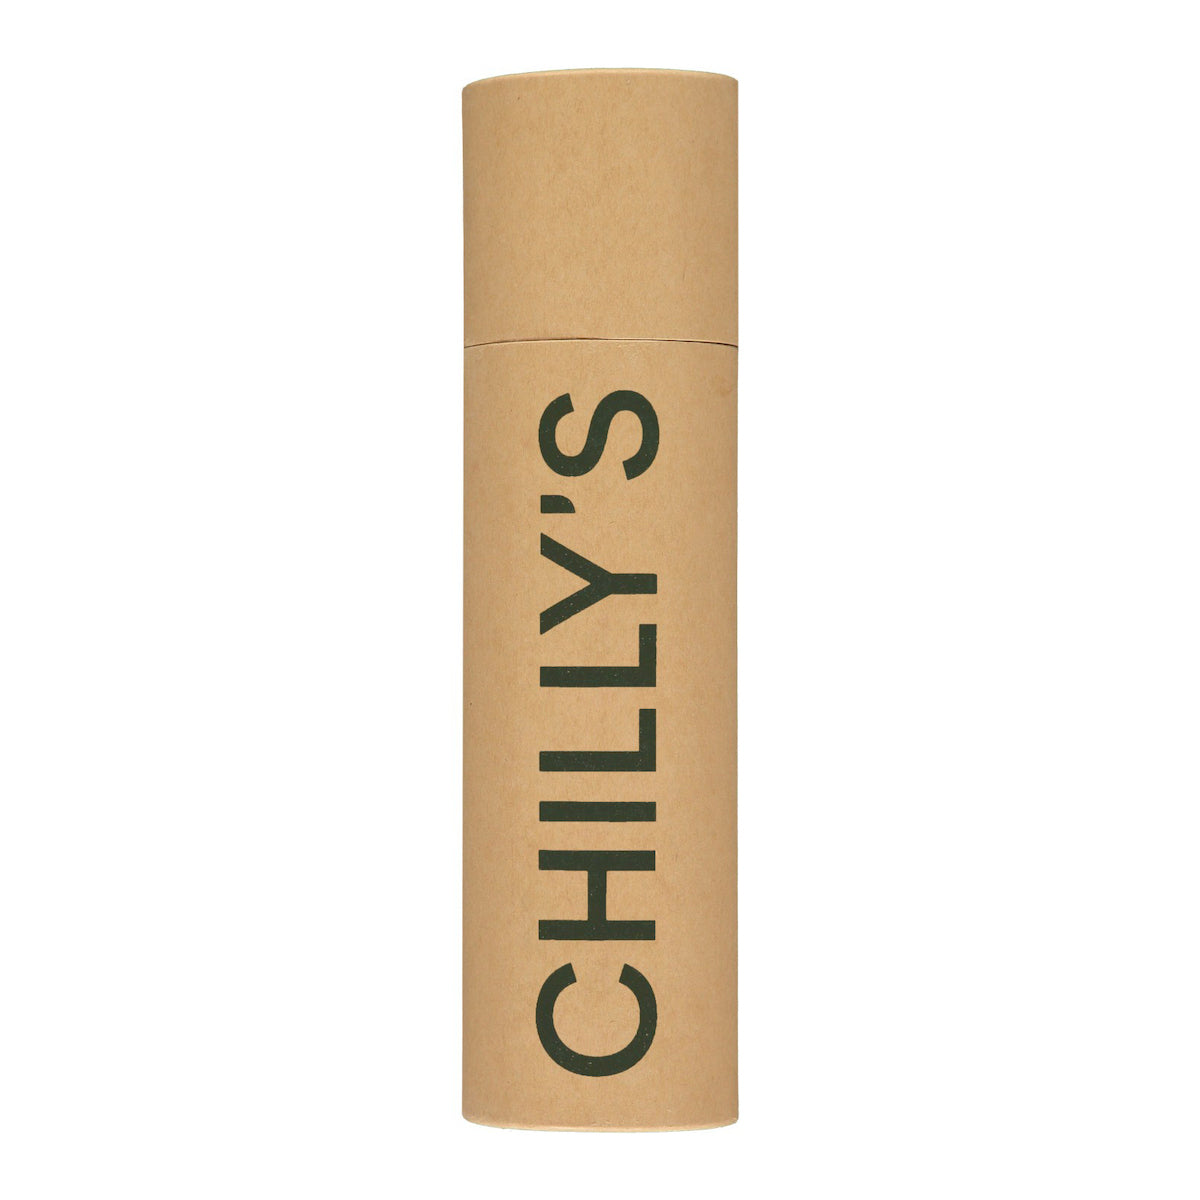 Chilly's Monochrome All Green Μπουκάλι Θερμός 0.75lt